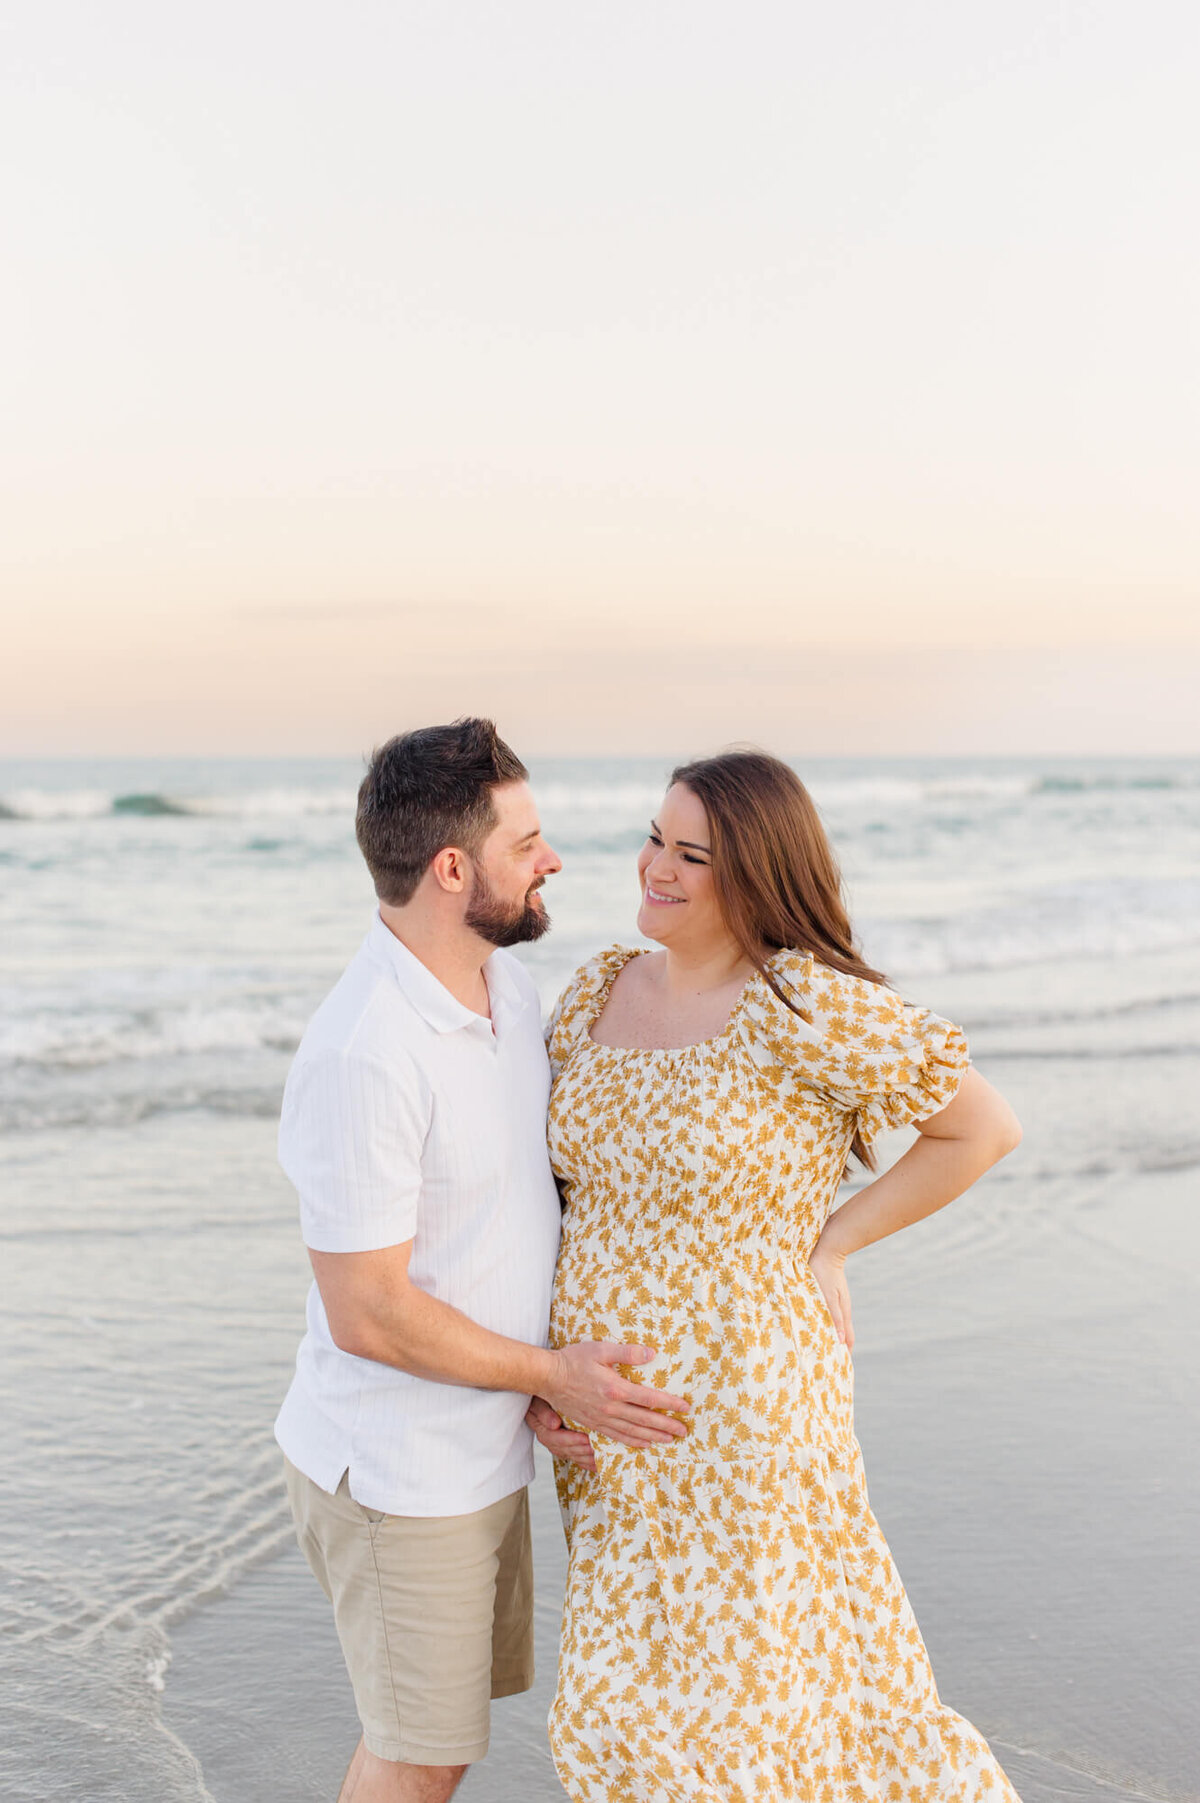 New parents stand on the beach holding mothers belly during their session with an Orlando maternity photographer